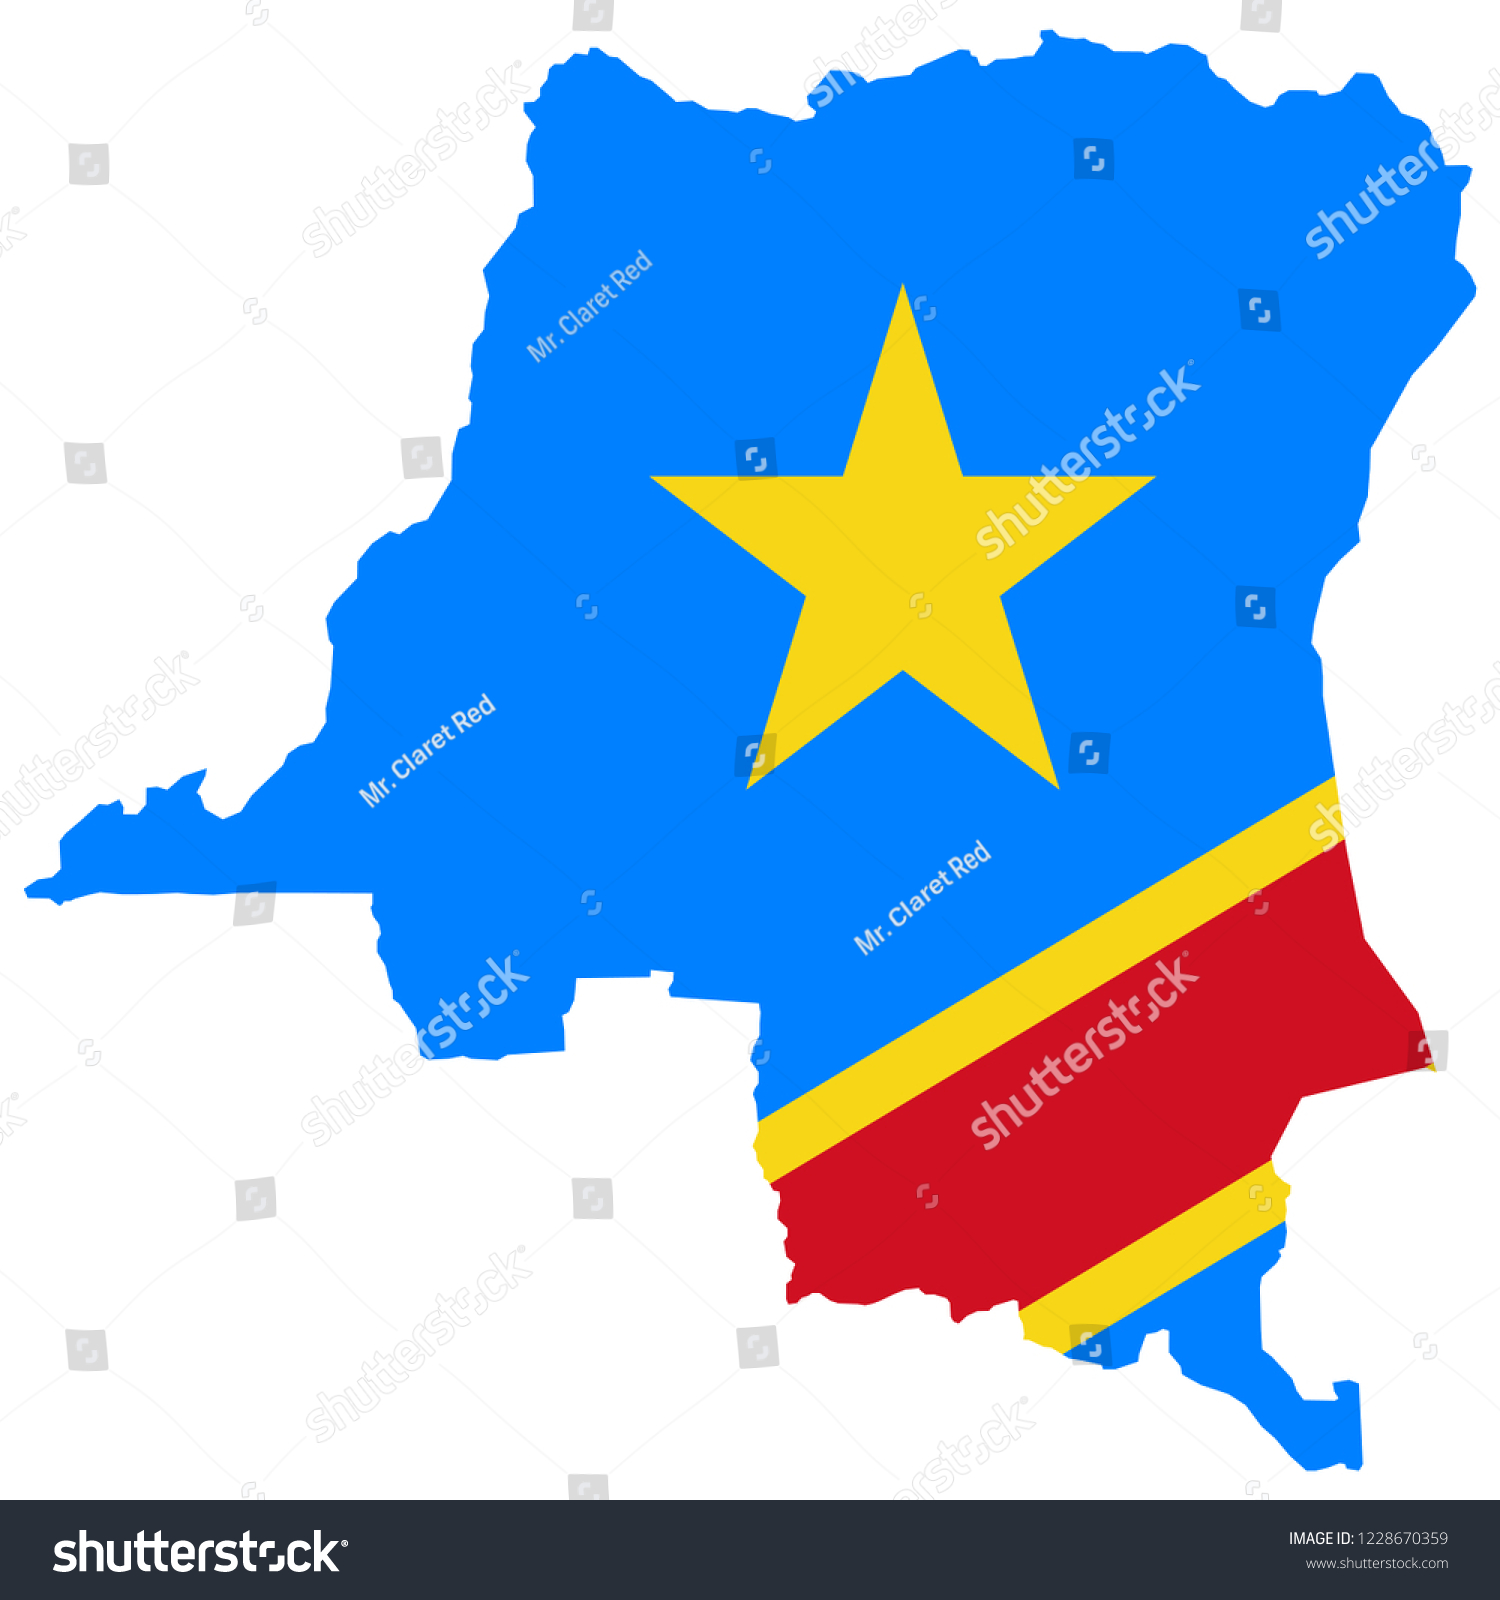 Democratic Republic of The Congo Map And Democratic Republic of The Congo Flag Vector #1228670359